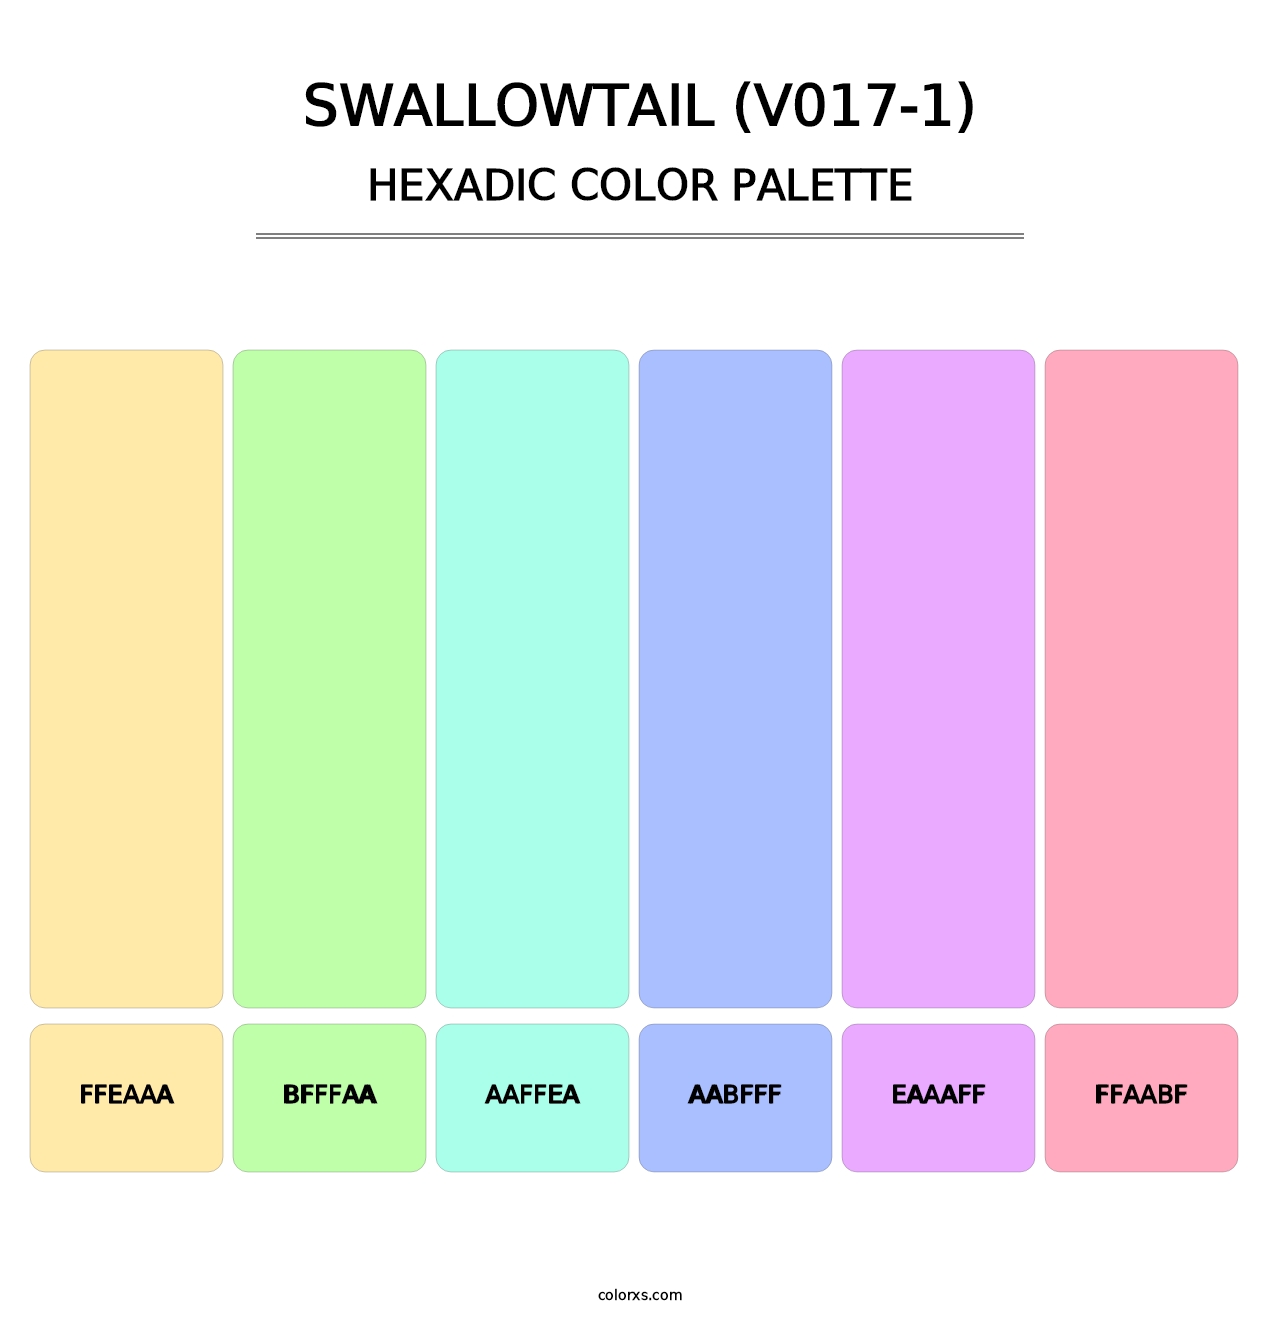 Swallowtail (V017-1) - Hexadic Color Palette